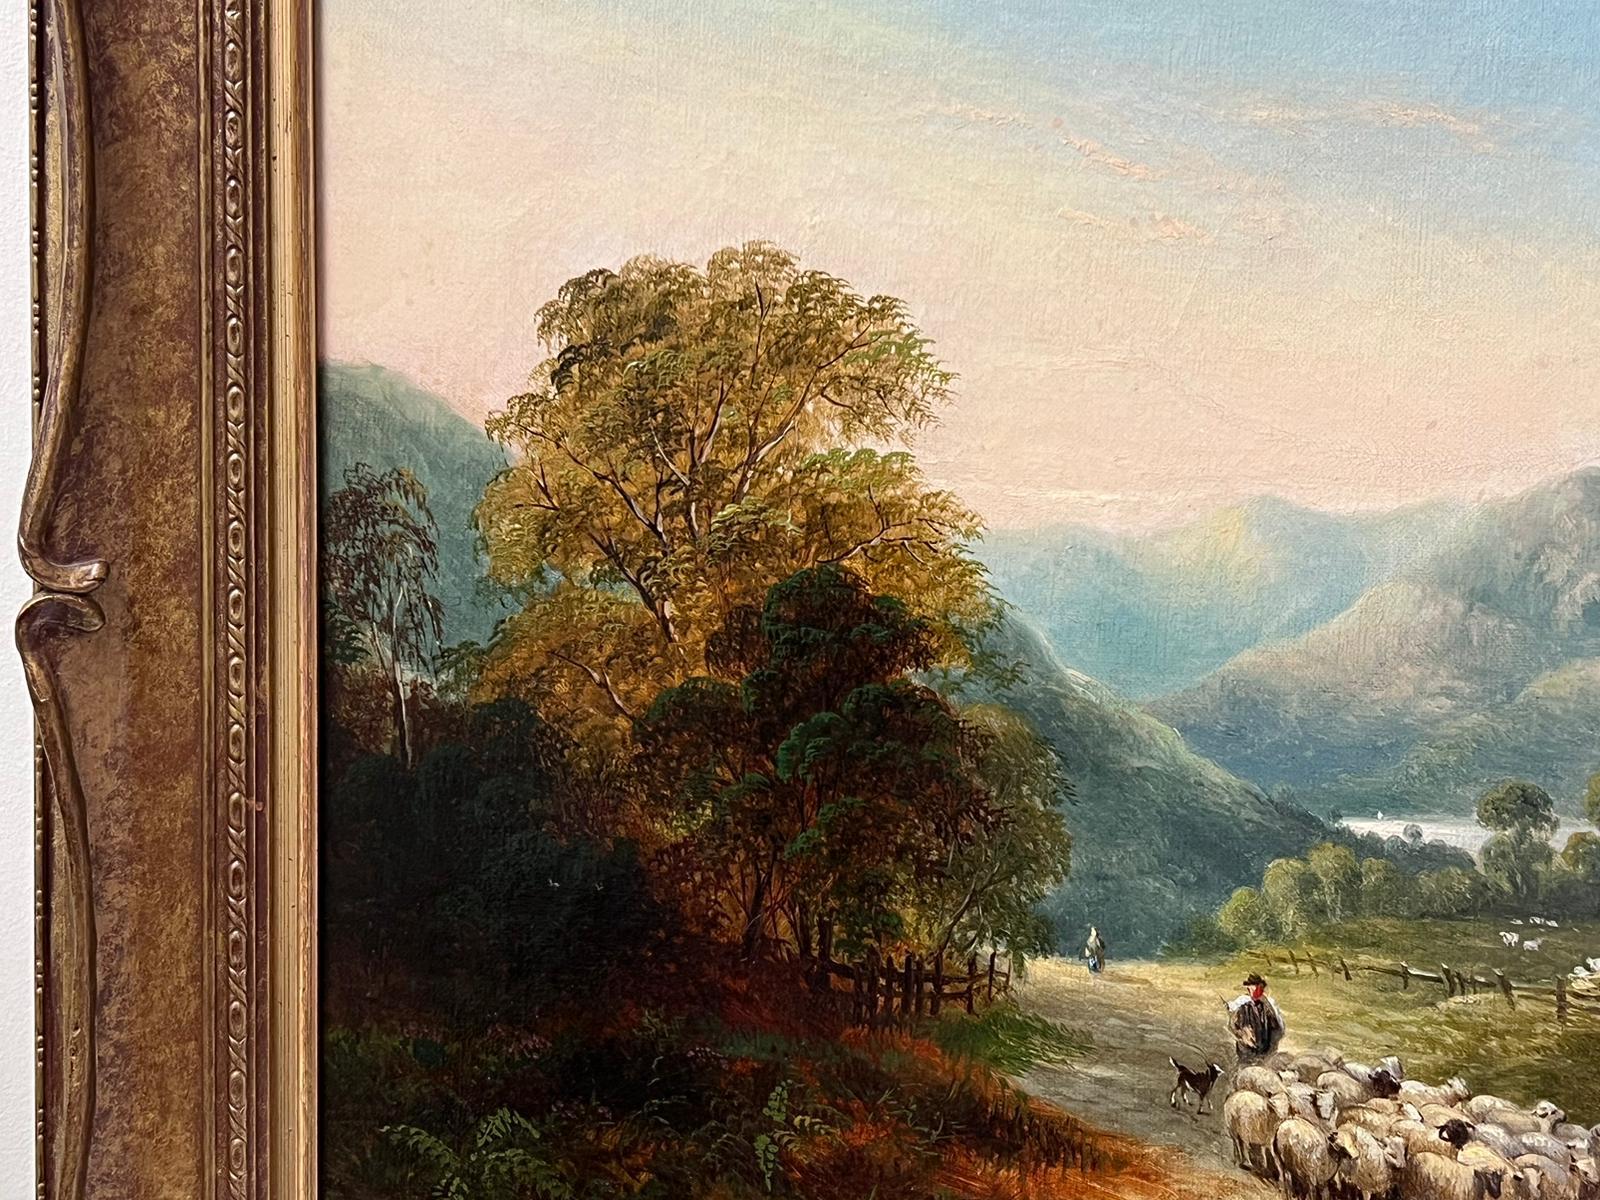 The Mountain Valley Pathway
Irish School, mid 19th century
oil on canvas, framed in gilt frame
framed: 19 x 25 inches
canvas: 15 x 22 inches
provenance: private collection, United Kingdom
condition: very good and sound condition 